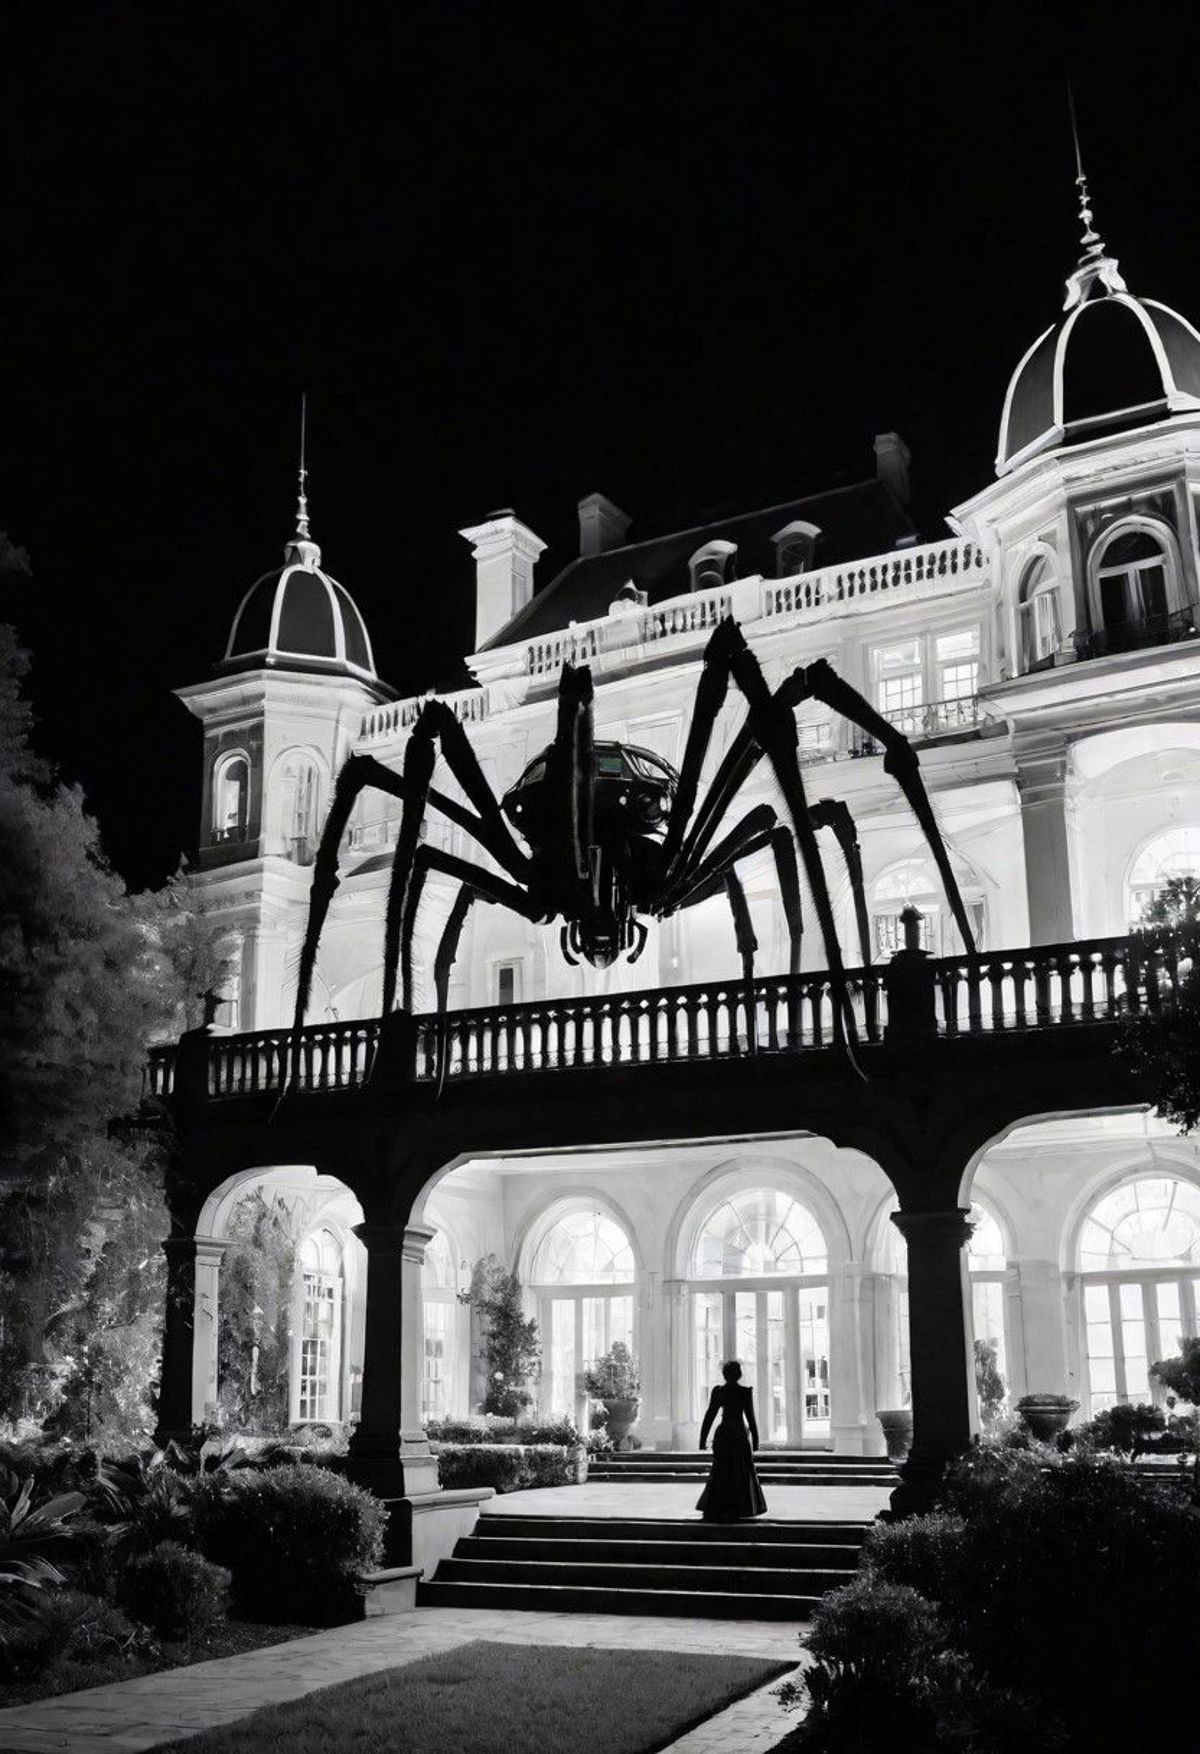 A spooky scene of a giant spider on the front porch of a mansion.